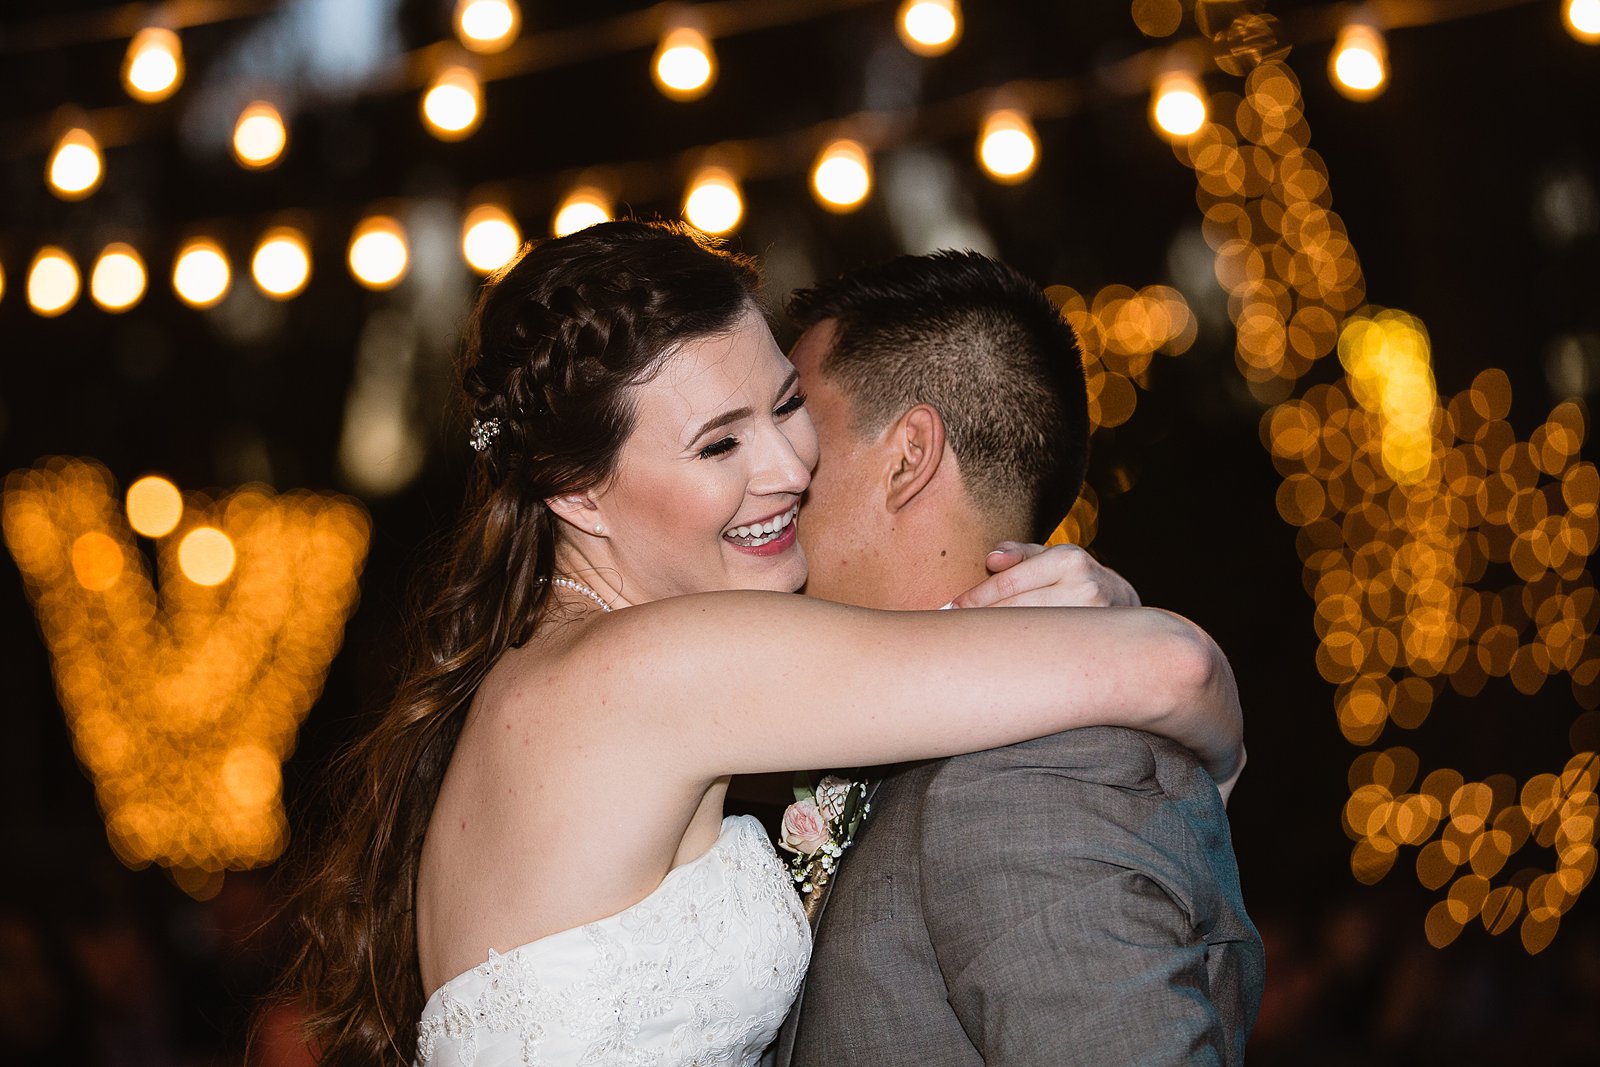 Bride and groom sharing first dance at their Schnepf Farms wedding reception by Arizona wedding photographer PMA Photography.